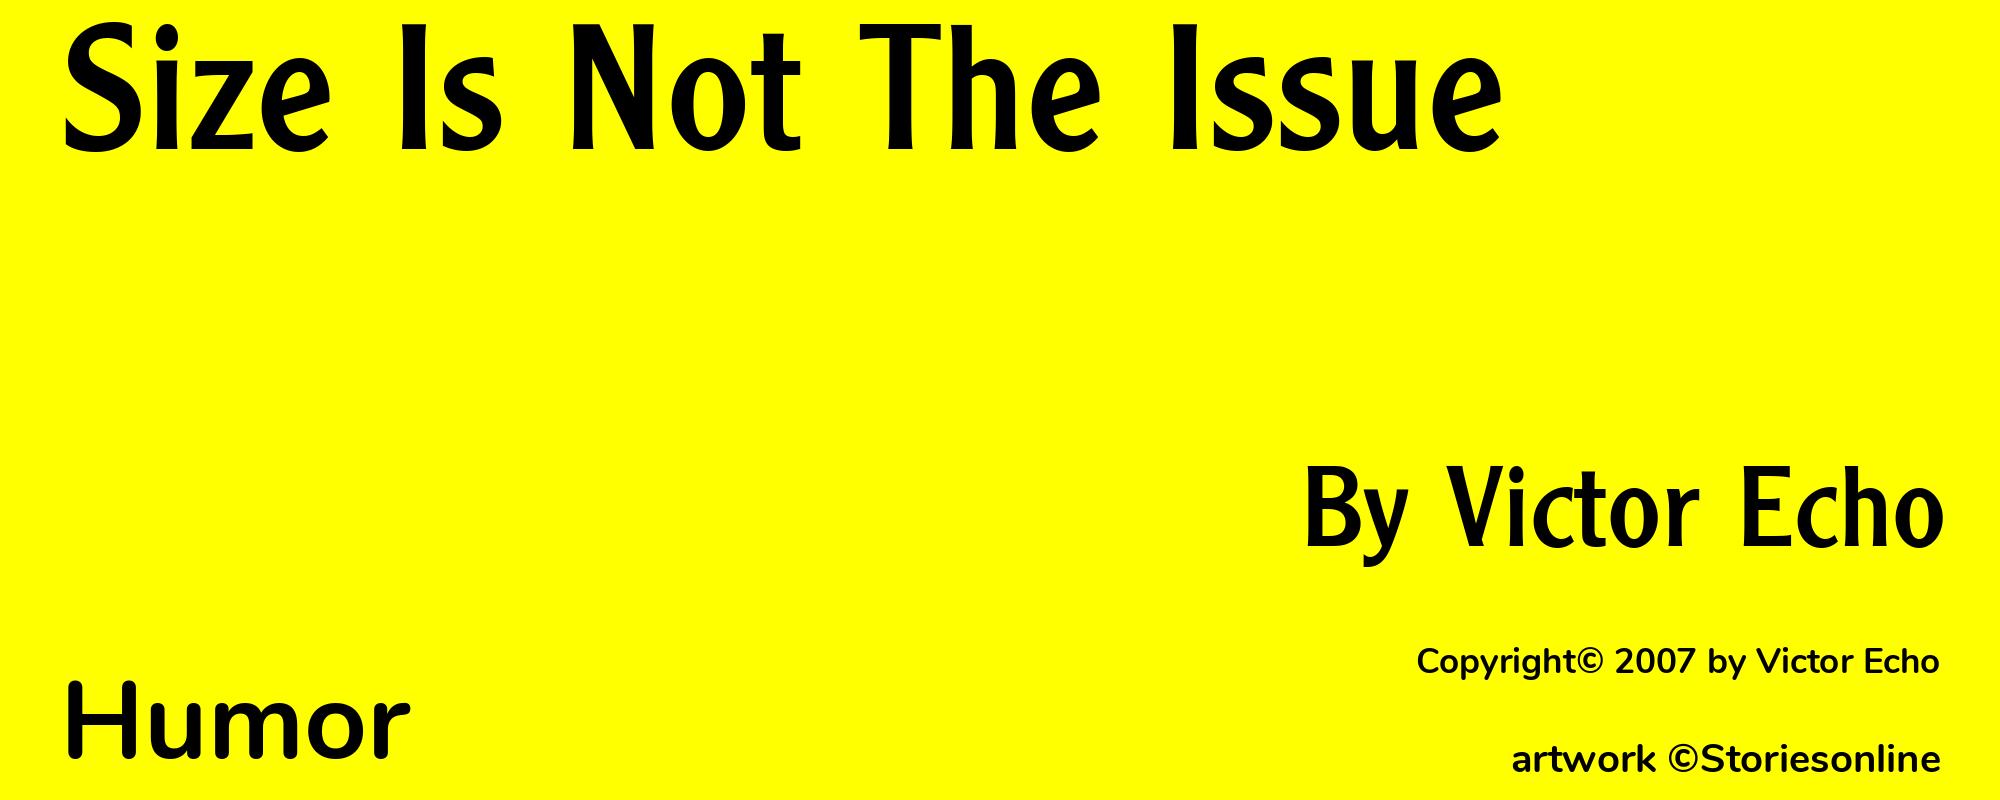 Size Is Not The Issue - Cover